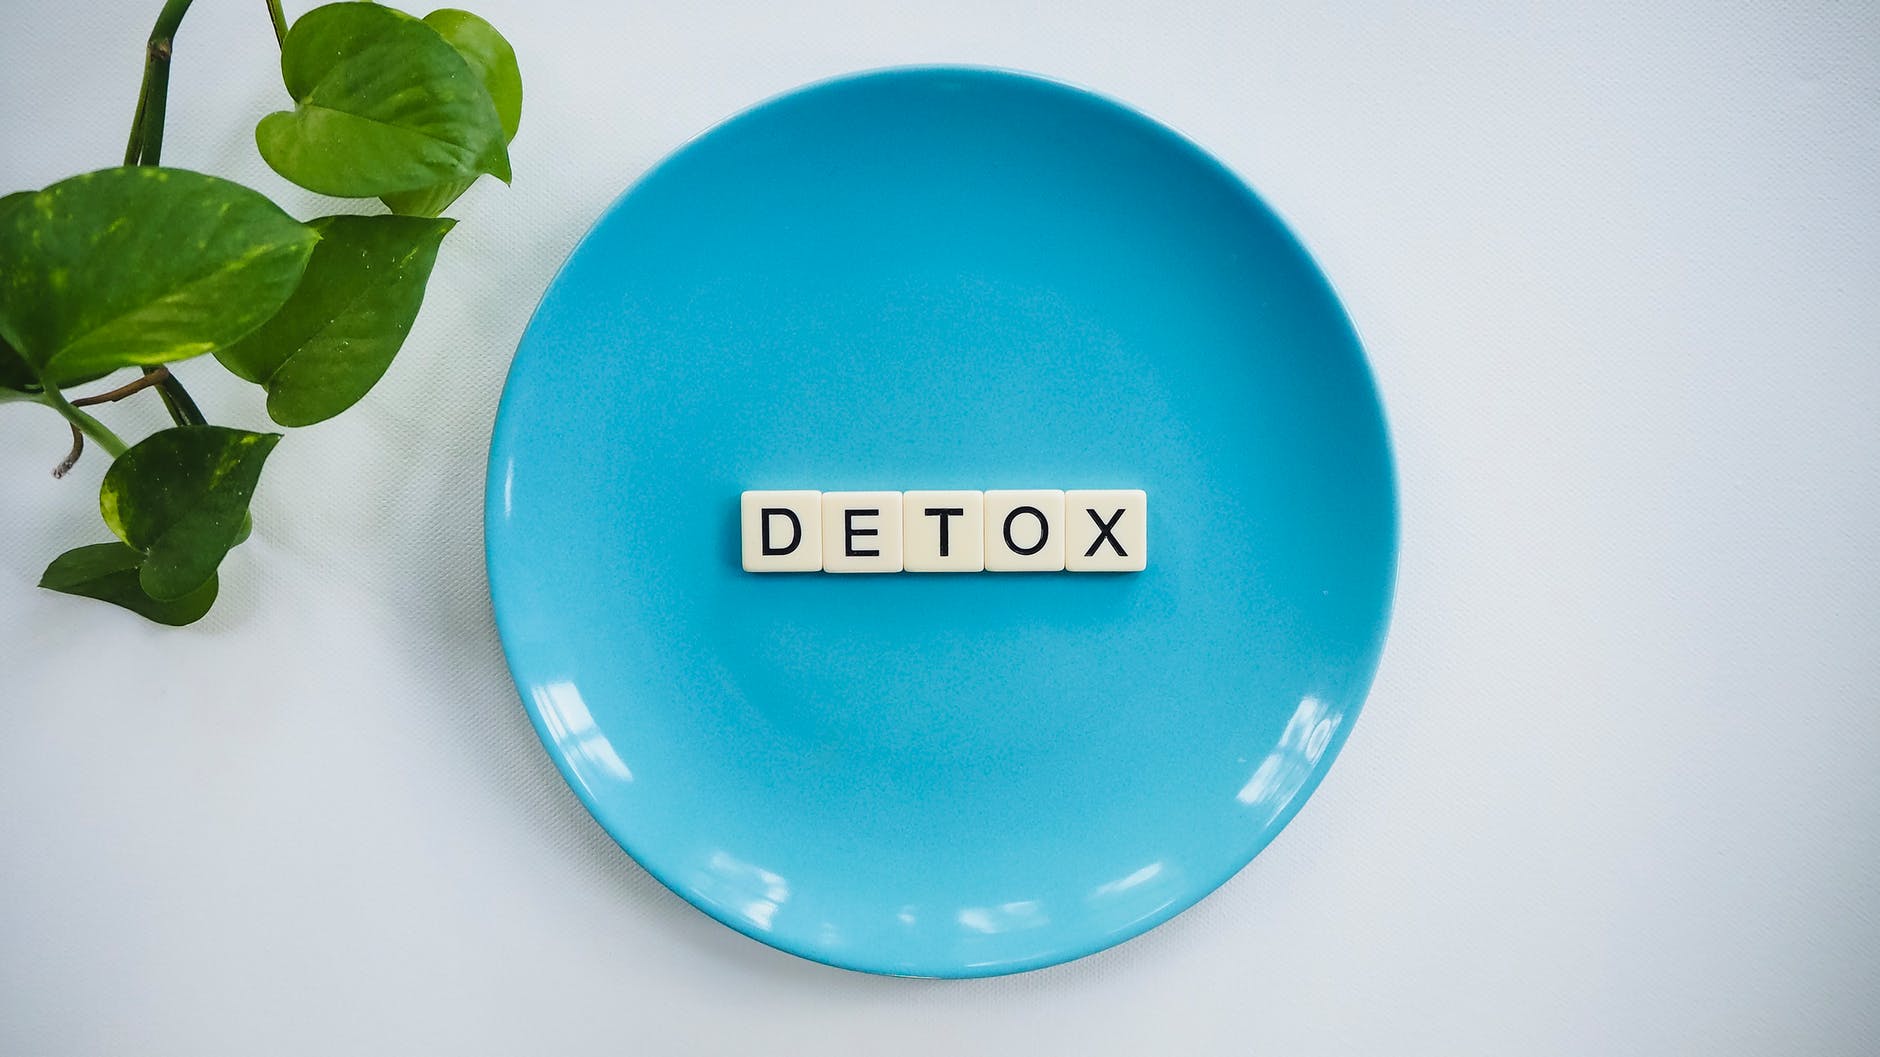 It is Time to Renew Your Body through BODY DETOXIFICATION